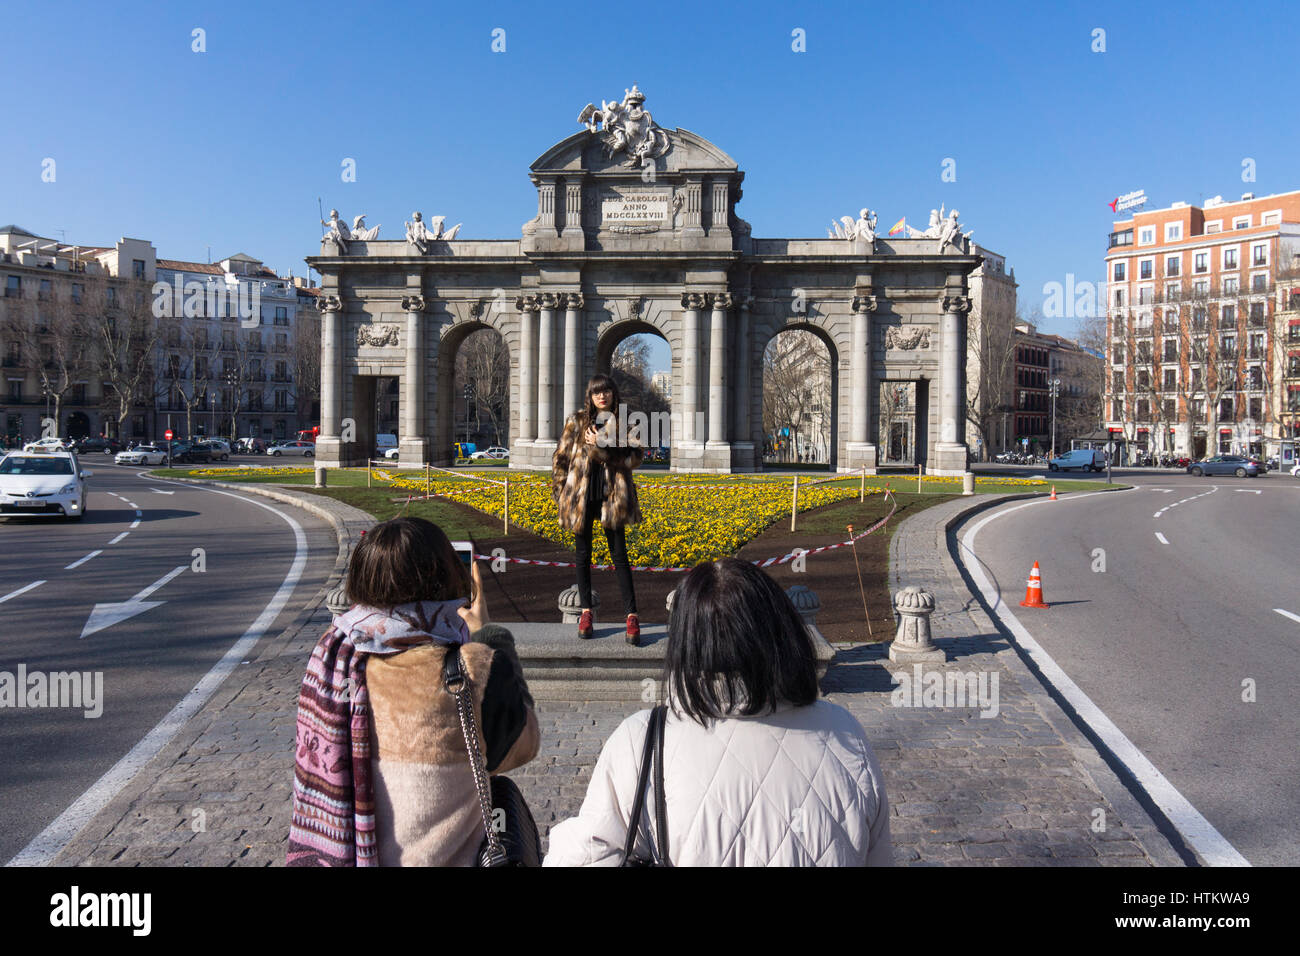 Tourist posing for a photograph in front of the Puerta de Alcalá, a  triumphal arch in the Plaza de la Independencia, Madrid Stock Photo - Alamy